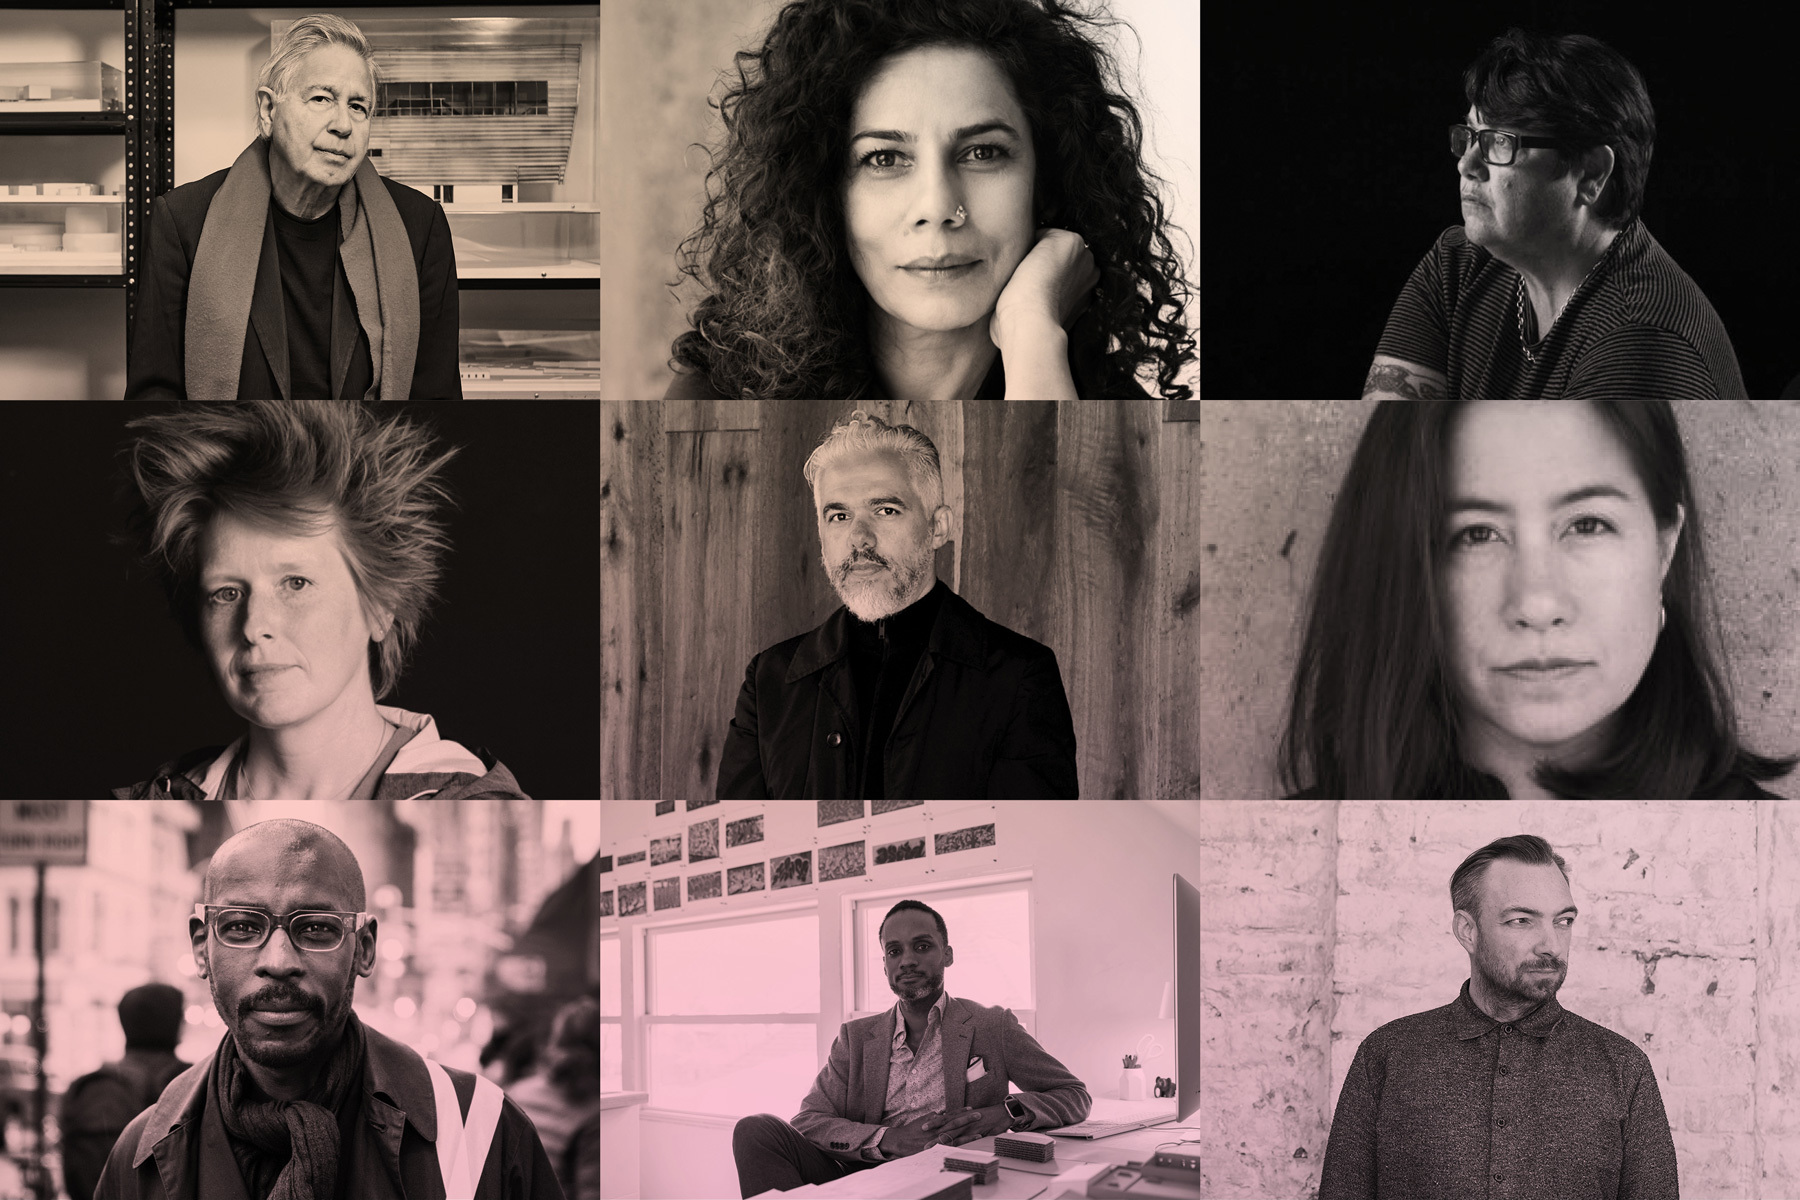 Top left to right: Bernard Tschumi, Anupama Kundoo, Catherine Opie. Middle left to right: Erin Besler, Héctor Esrawe, Ana María León. Bottom left to right: Mario Gooden, Sekou Cooke, Liam Young.